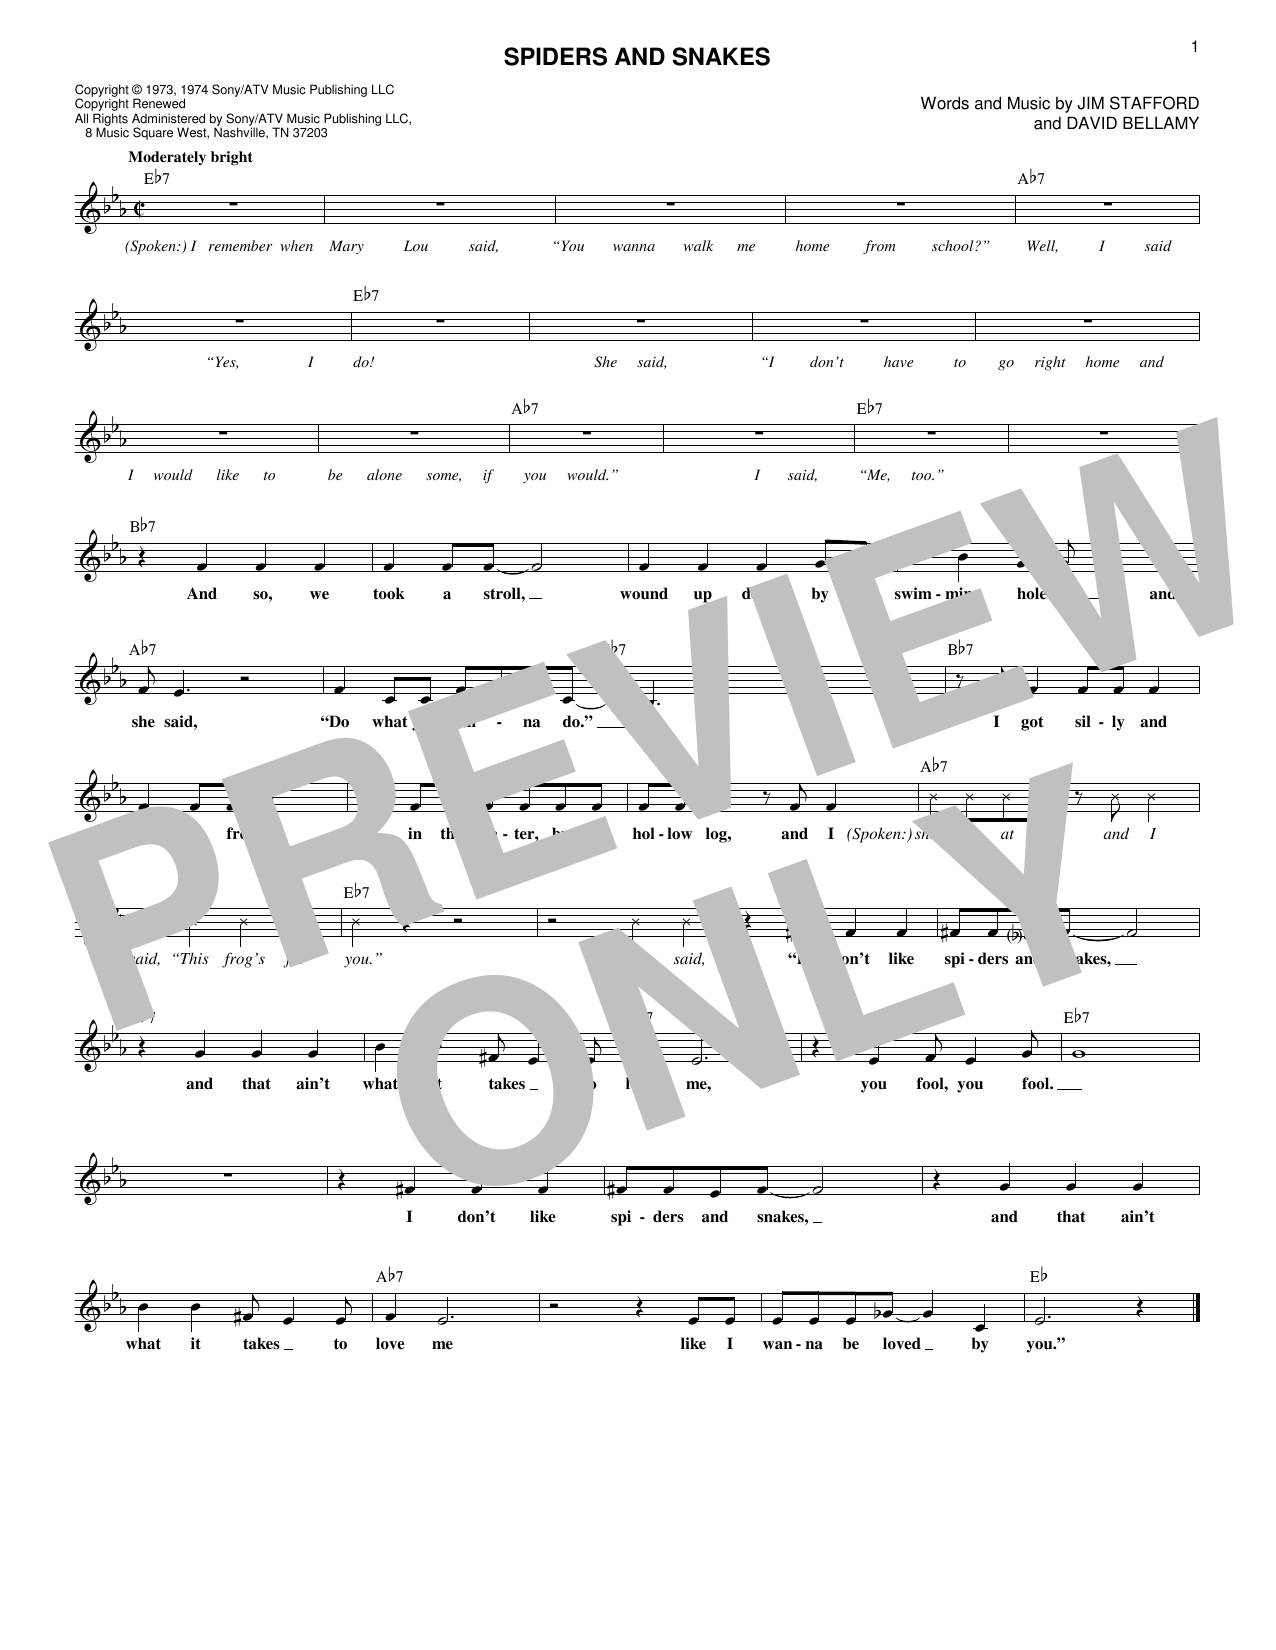 Download The Party Spiders And Snakes Sheet Music